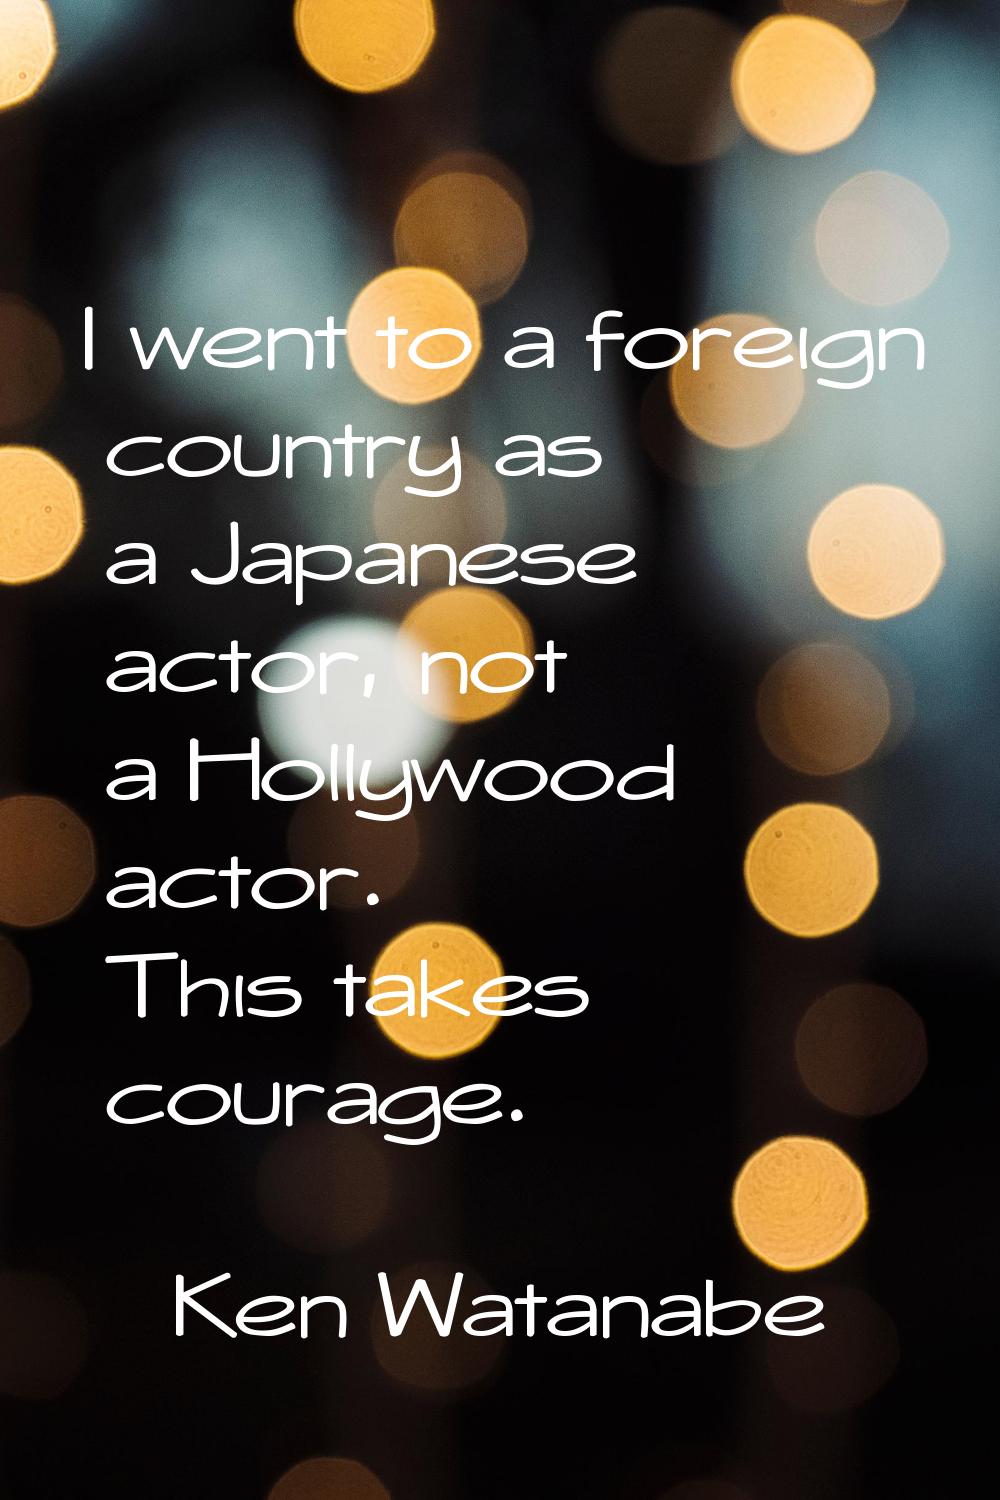 I went to a foreign country as a Japanese actor, not a Hollywood actor. This takes courage.